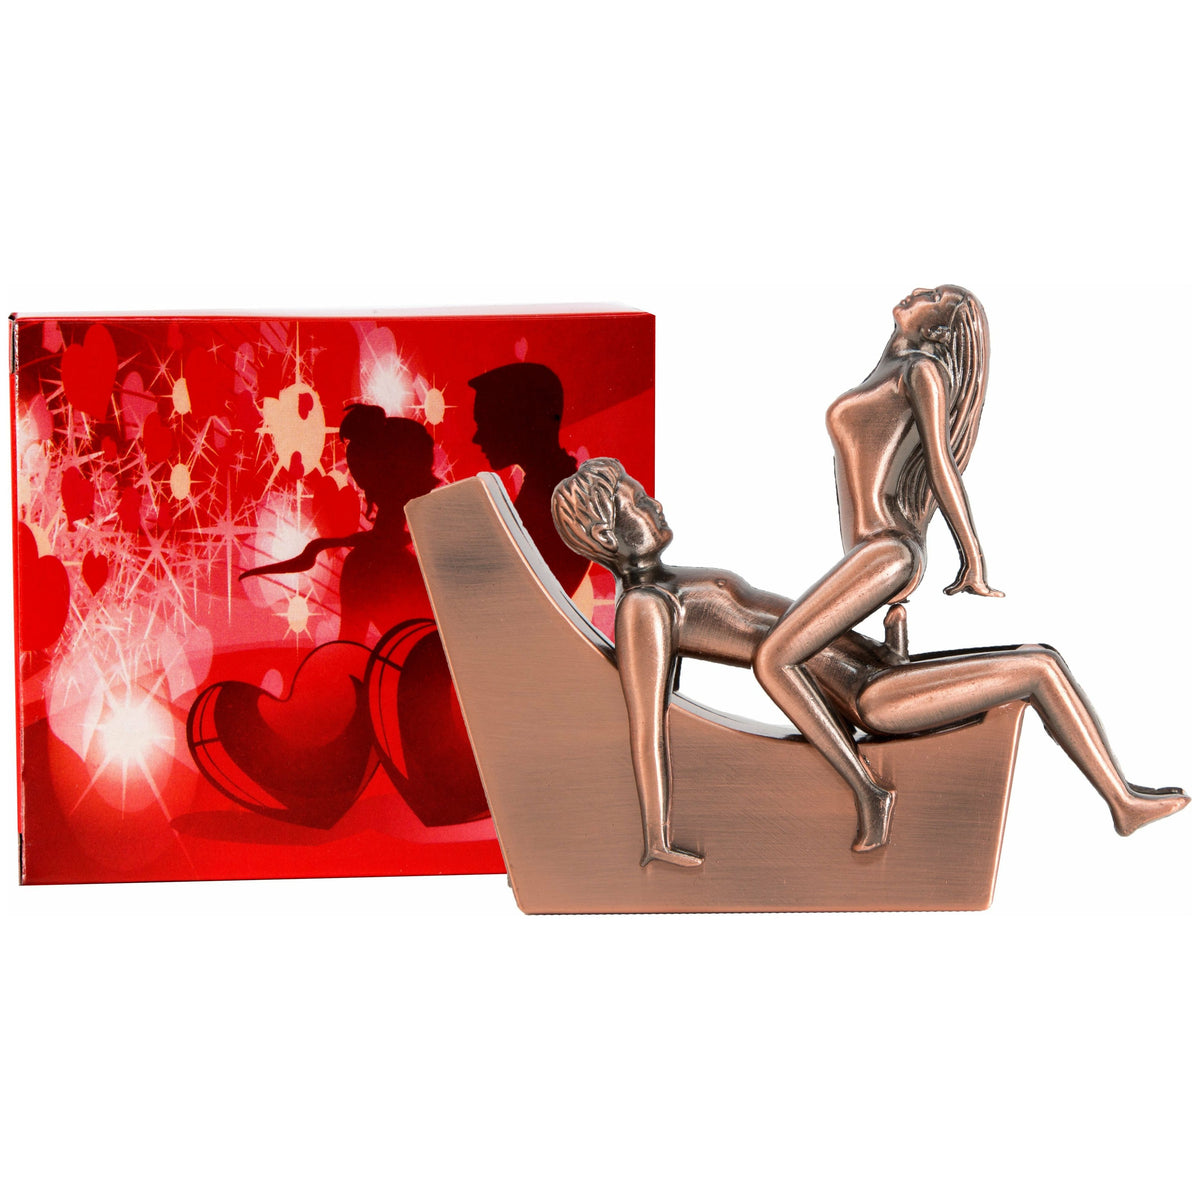 Novelty Cigar Torch Novelty Cigar Torch - Couple on Chaise Lounge (Empty)